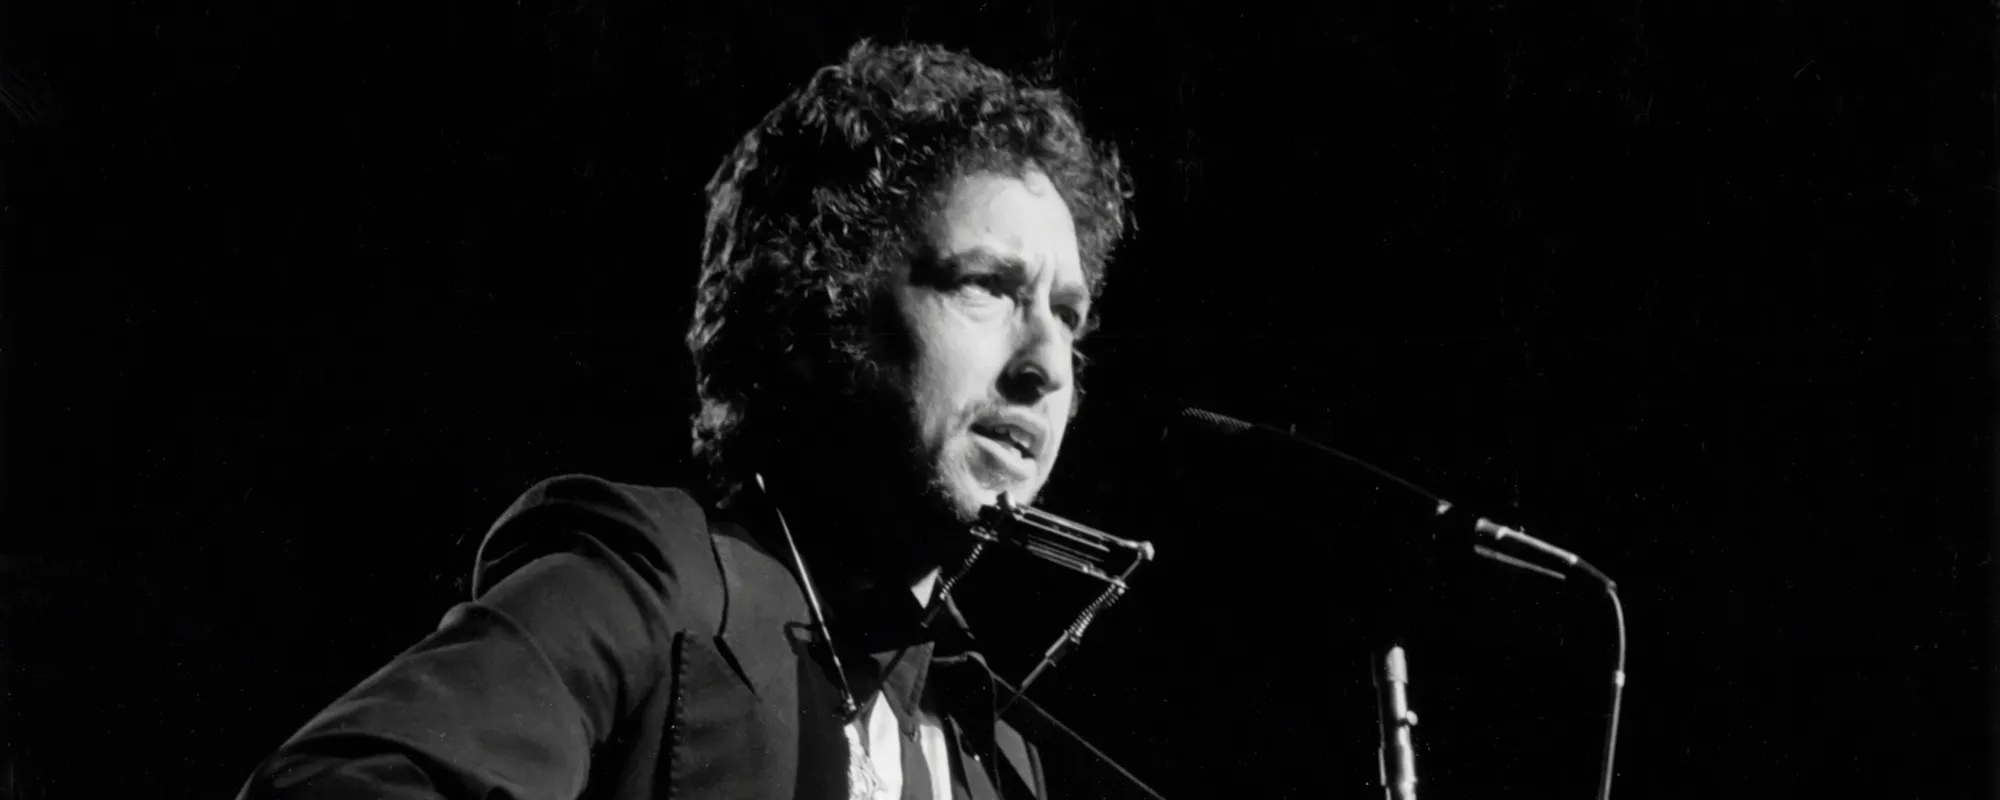 Bob Dylan Covers Grateful Dead’s “Truckin’” for the First Time in His Career